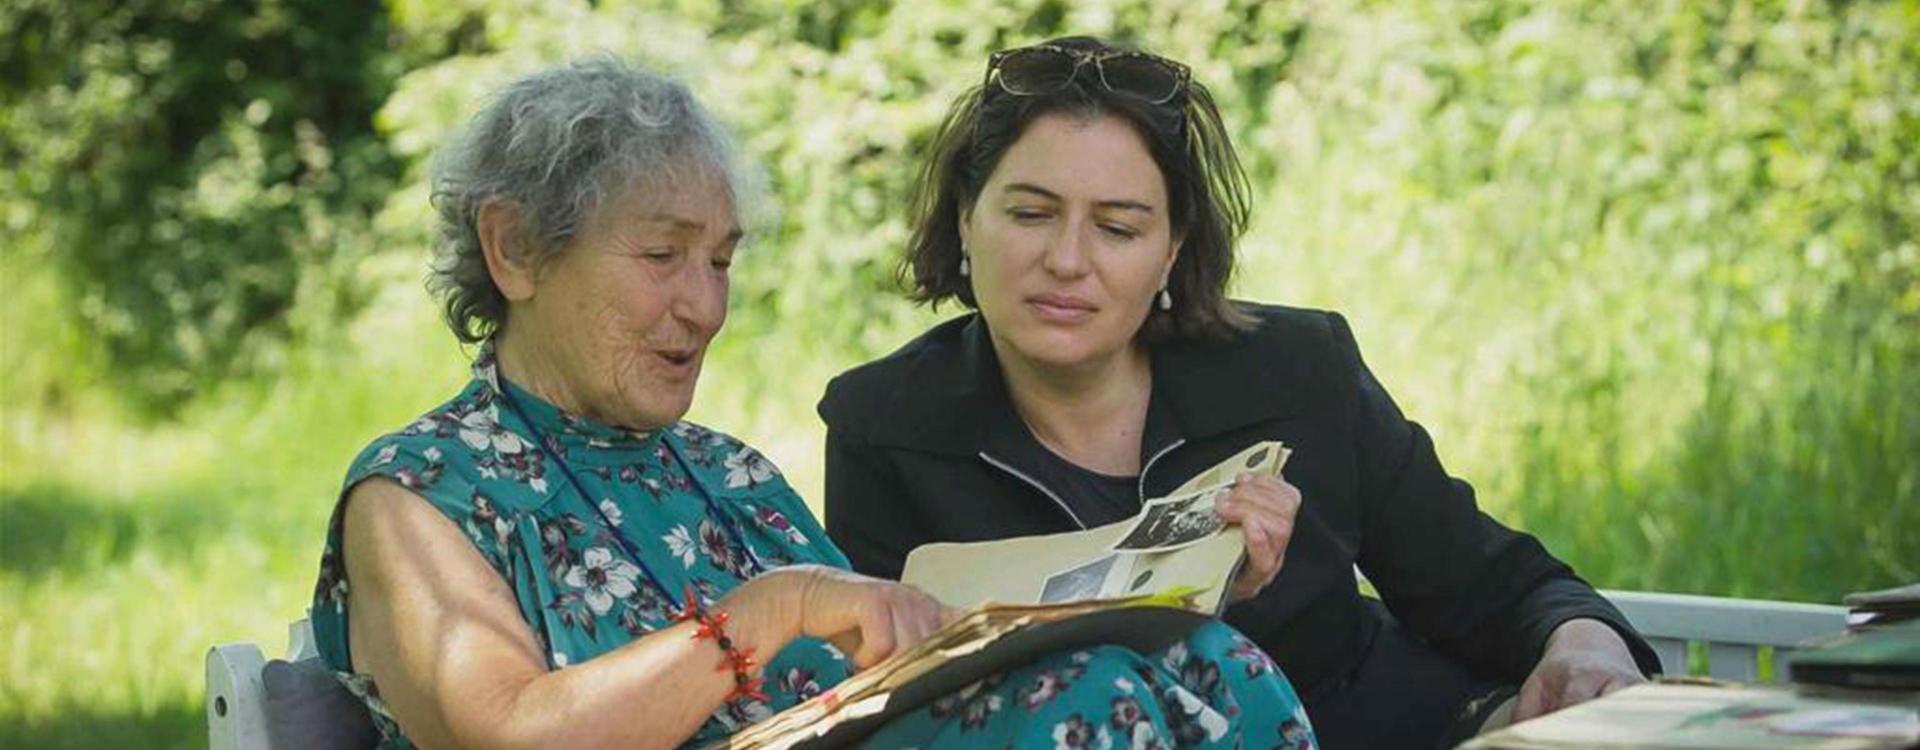 Two women sit on a garden bench and leaf through a photo album together.